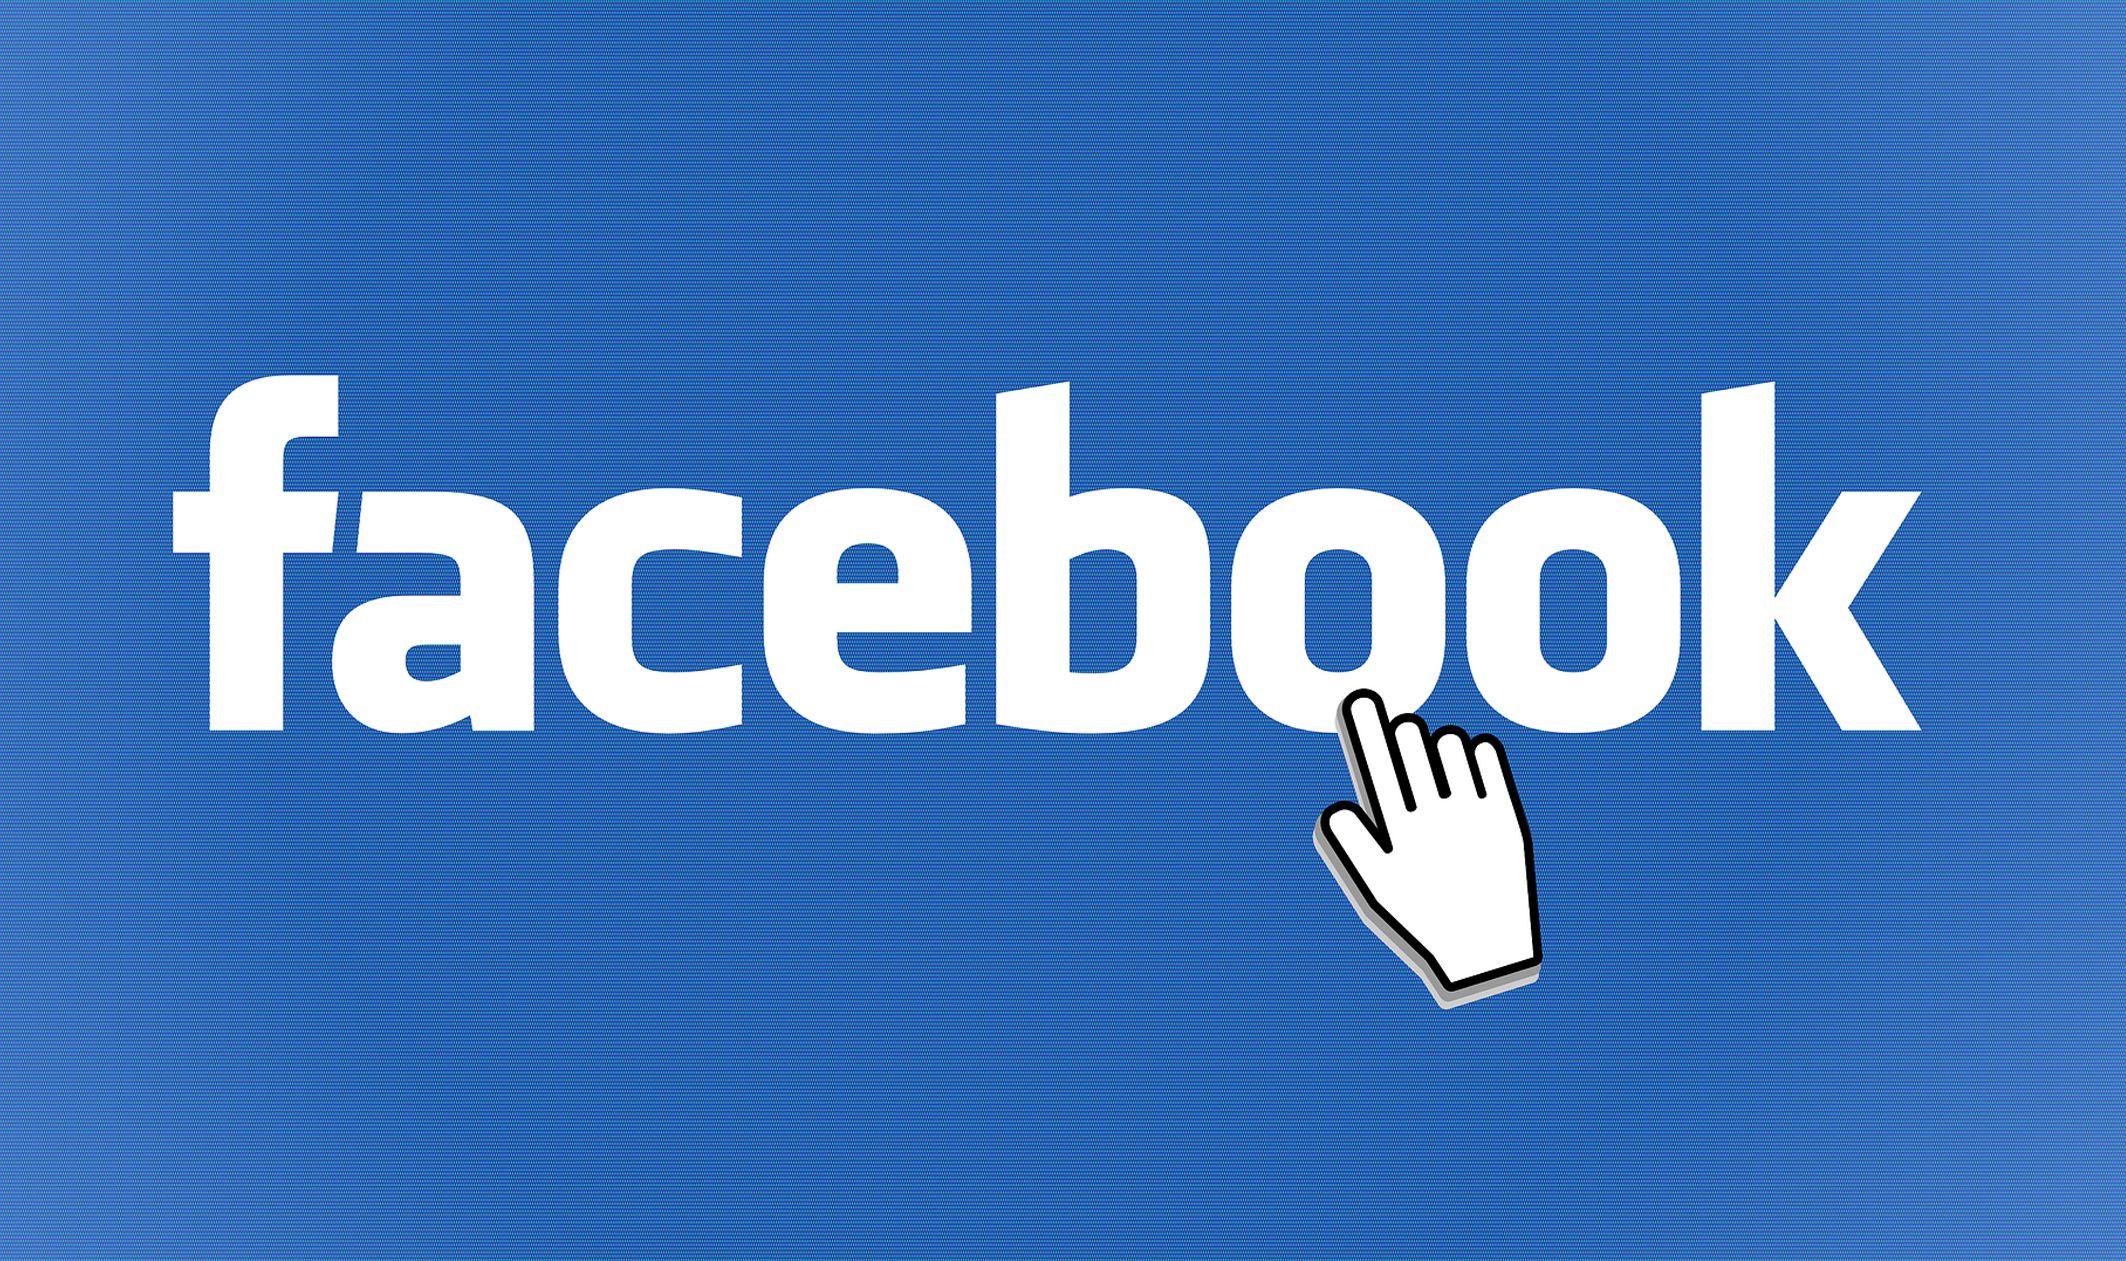 Find Me On Facebook Logo - 5 Things You Need to Know About The Recent Facebook Changes | Nivo